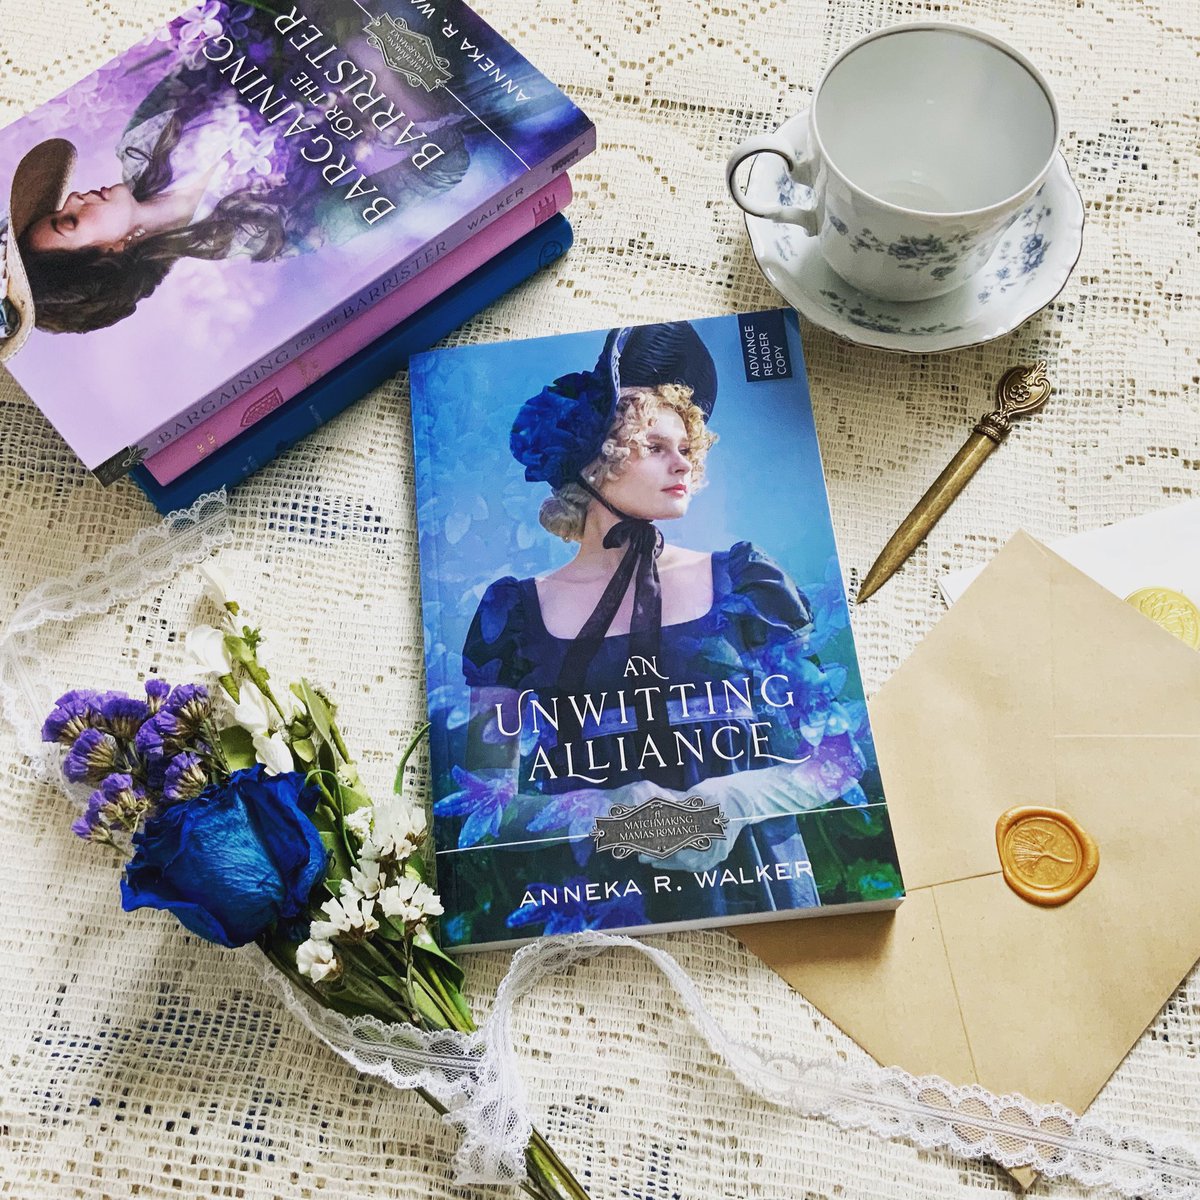 Happy Book Birthday! #annekarwalker Adored this book! Now available here: amazon.com/gp/aw/d/B0C63N… @covenantcomms #booktwitter #bookreleaseday #wholesomeromance #Regencyromance #cleanregencyromance #bookreview #mustread